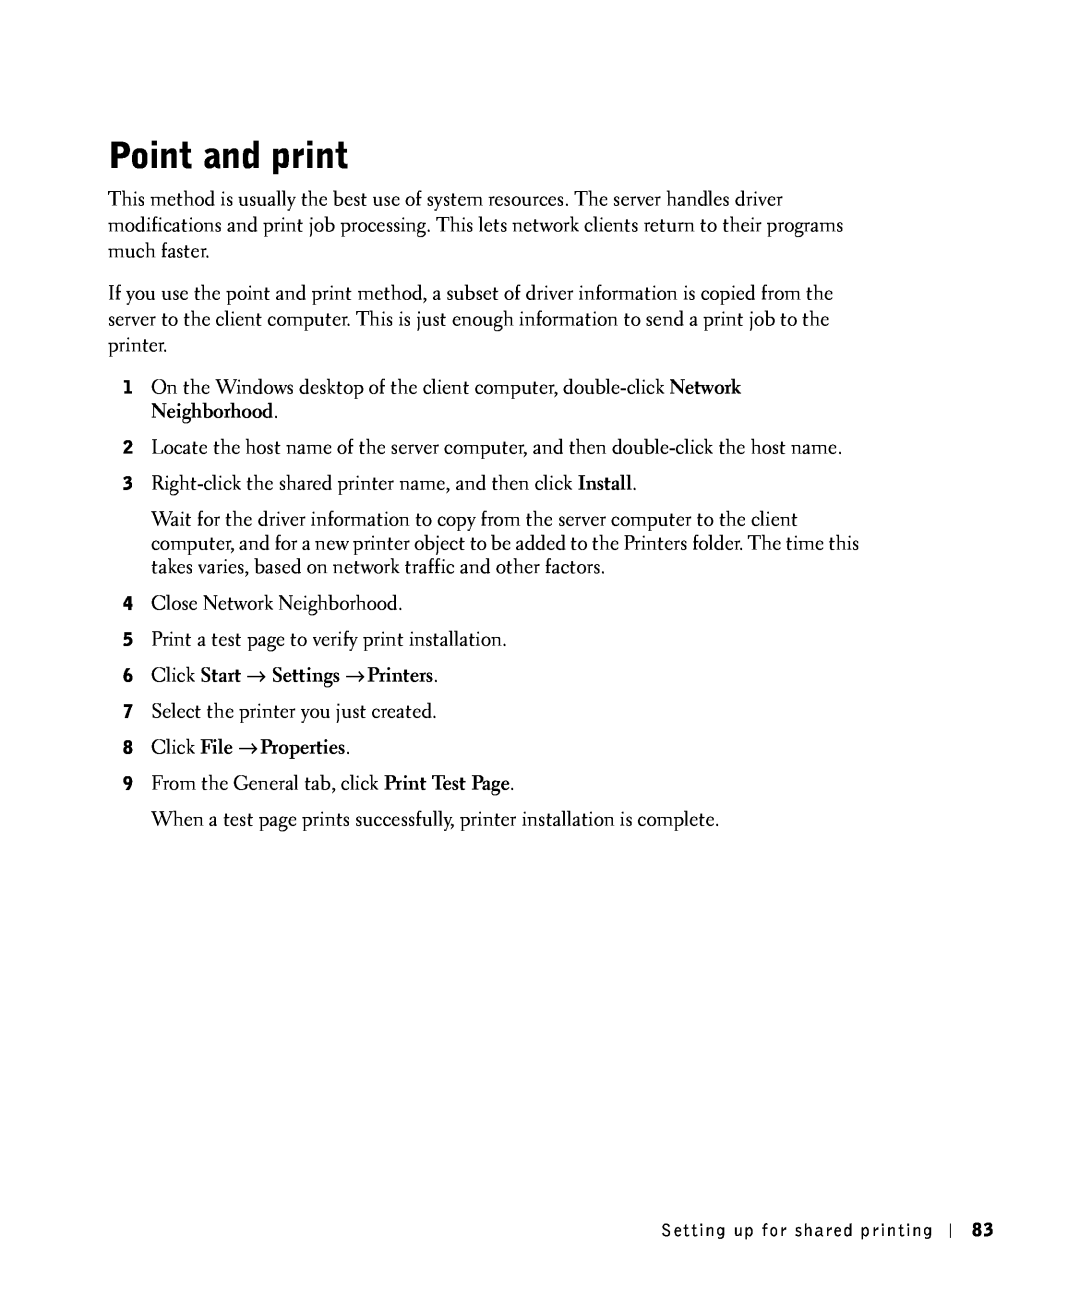 Dell S2500 owner manual Point and print, Click Start → Settings → Printers, Click File → Properties 